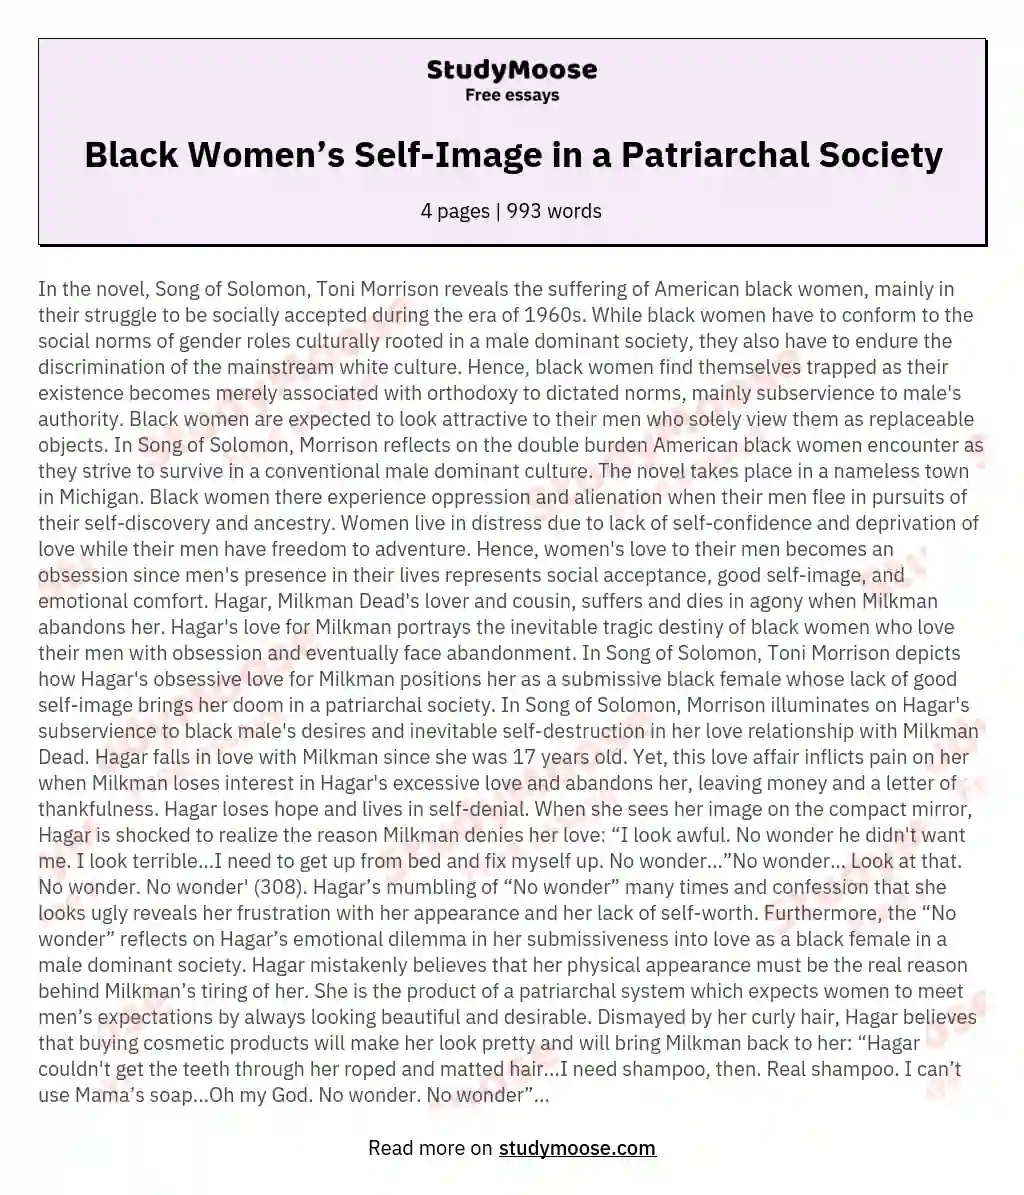 Black Women’s Self-Image in a Patriarchal Society essay